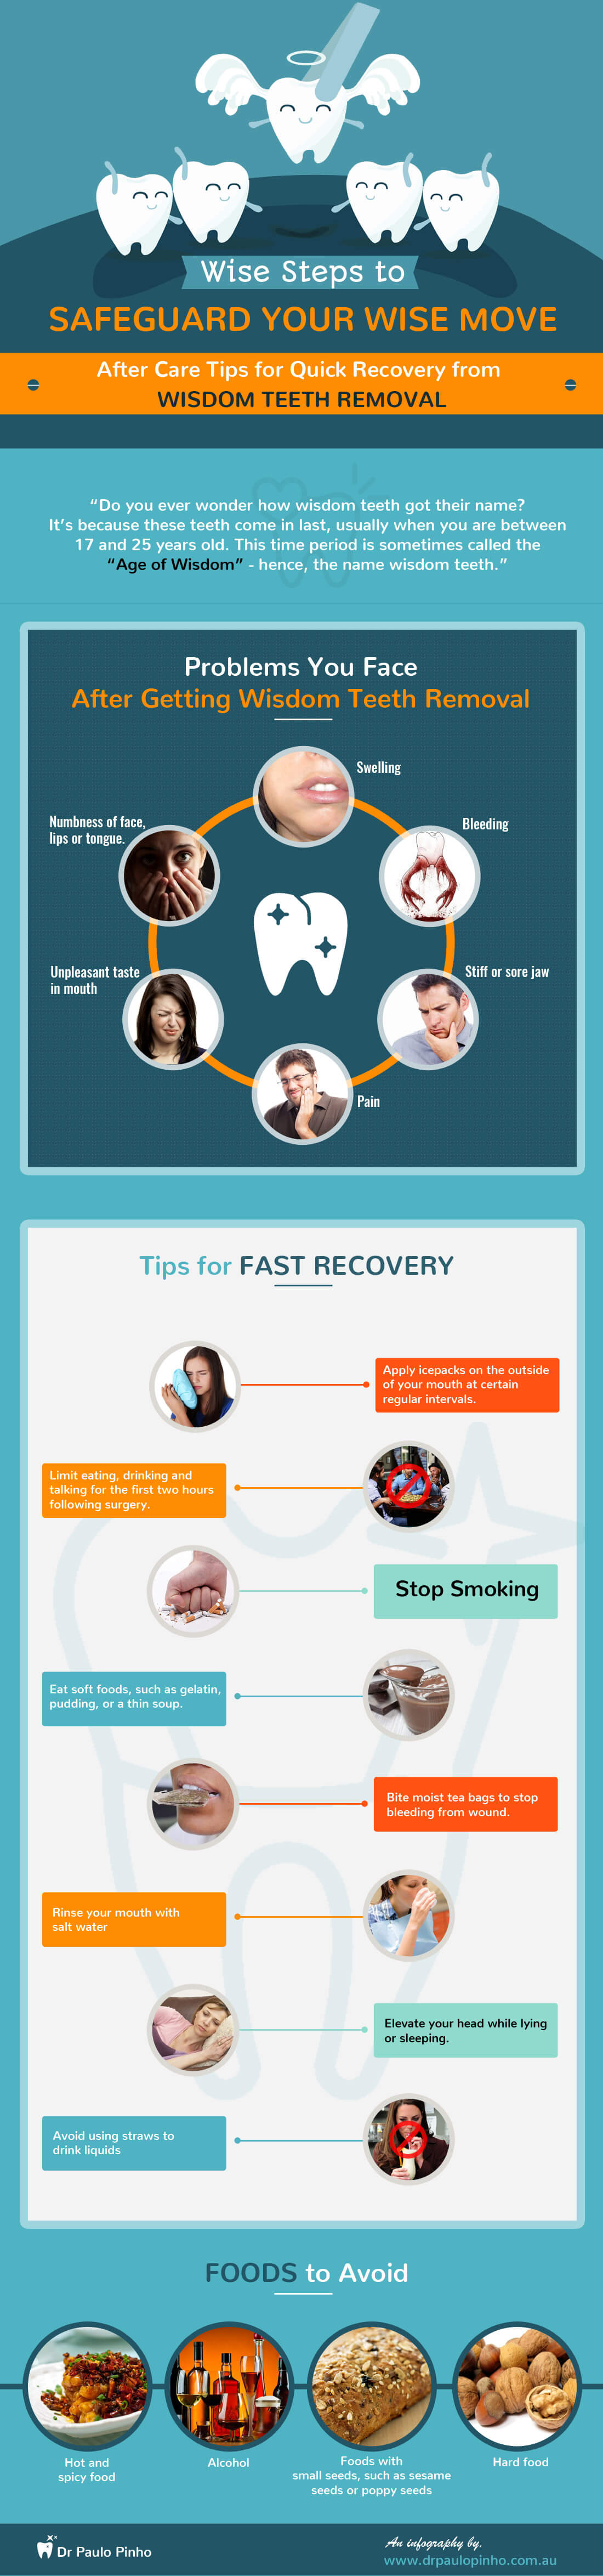 Wisdom Teeth Removal Recovery Tips